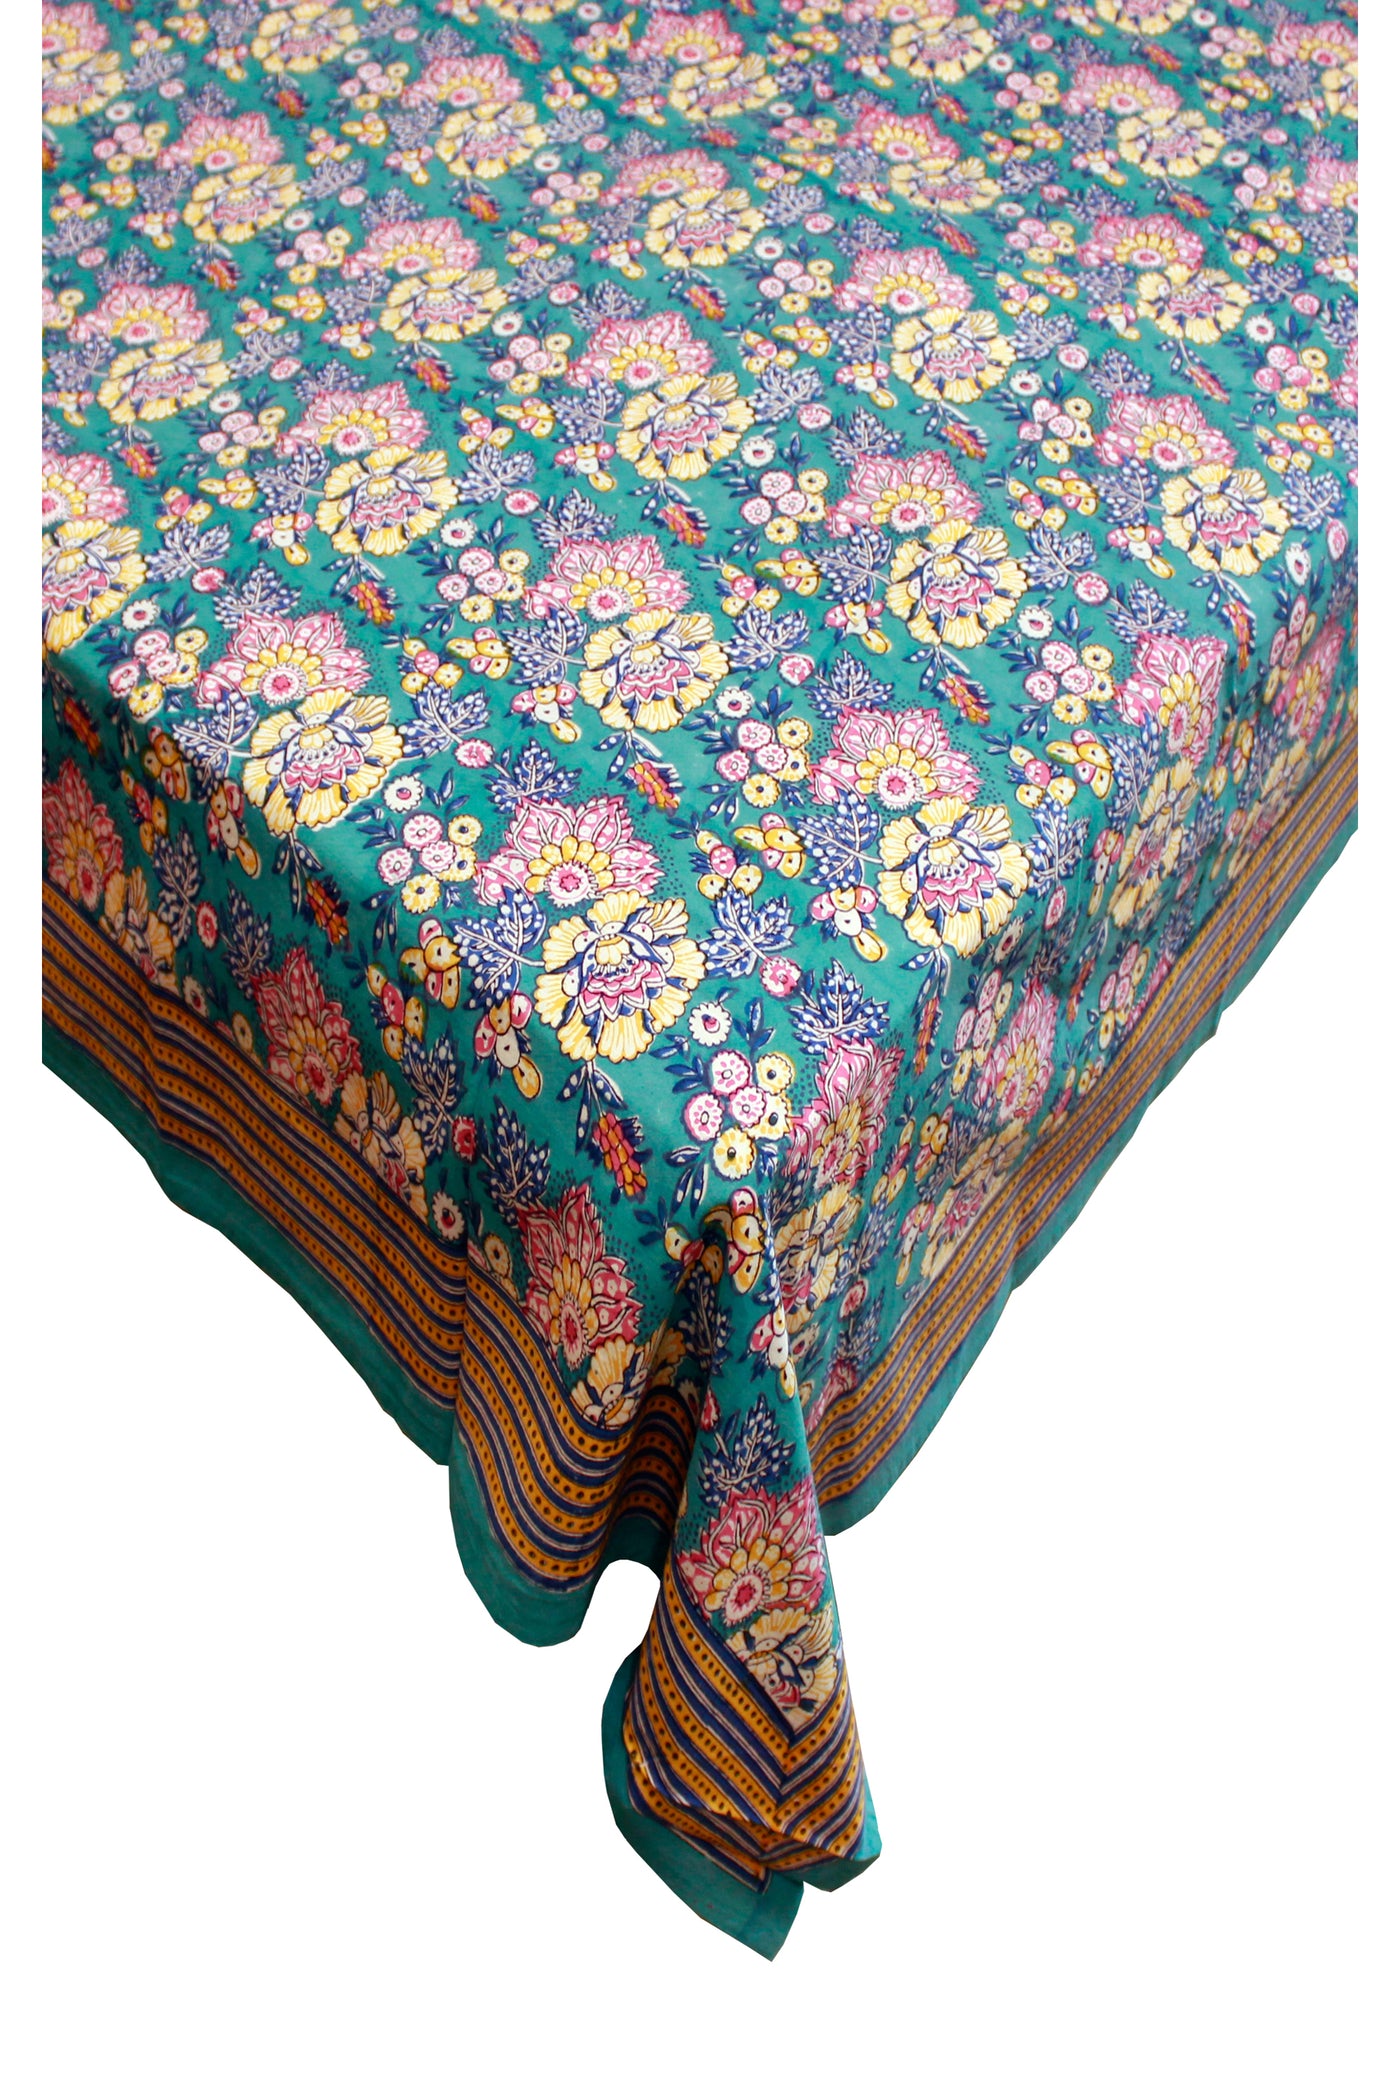 Square Table Cover Floral Print in Sea Green